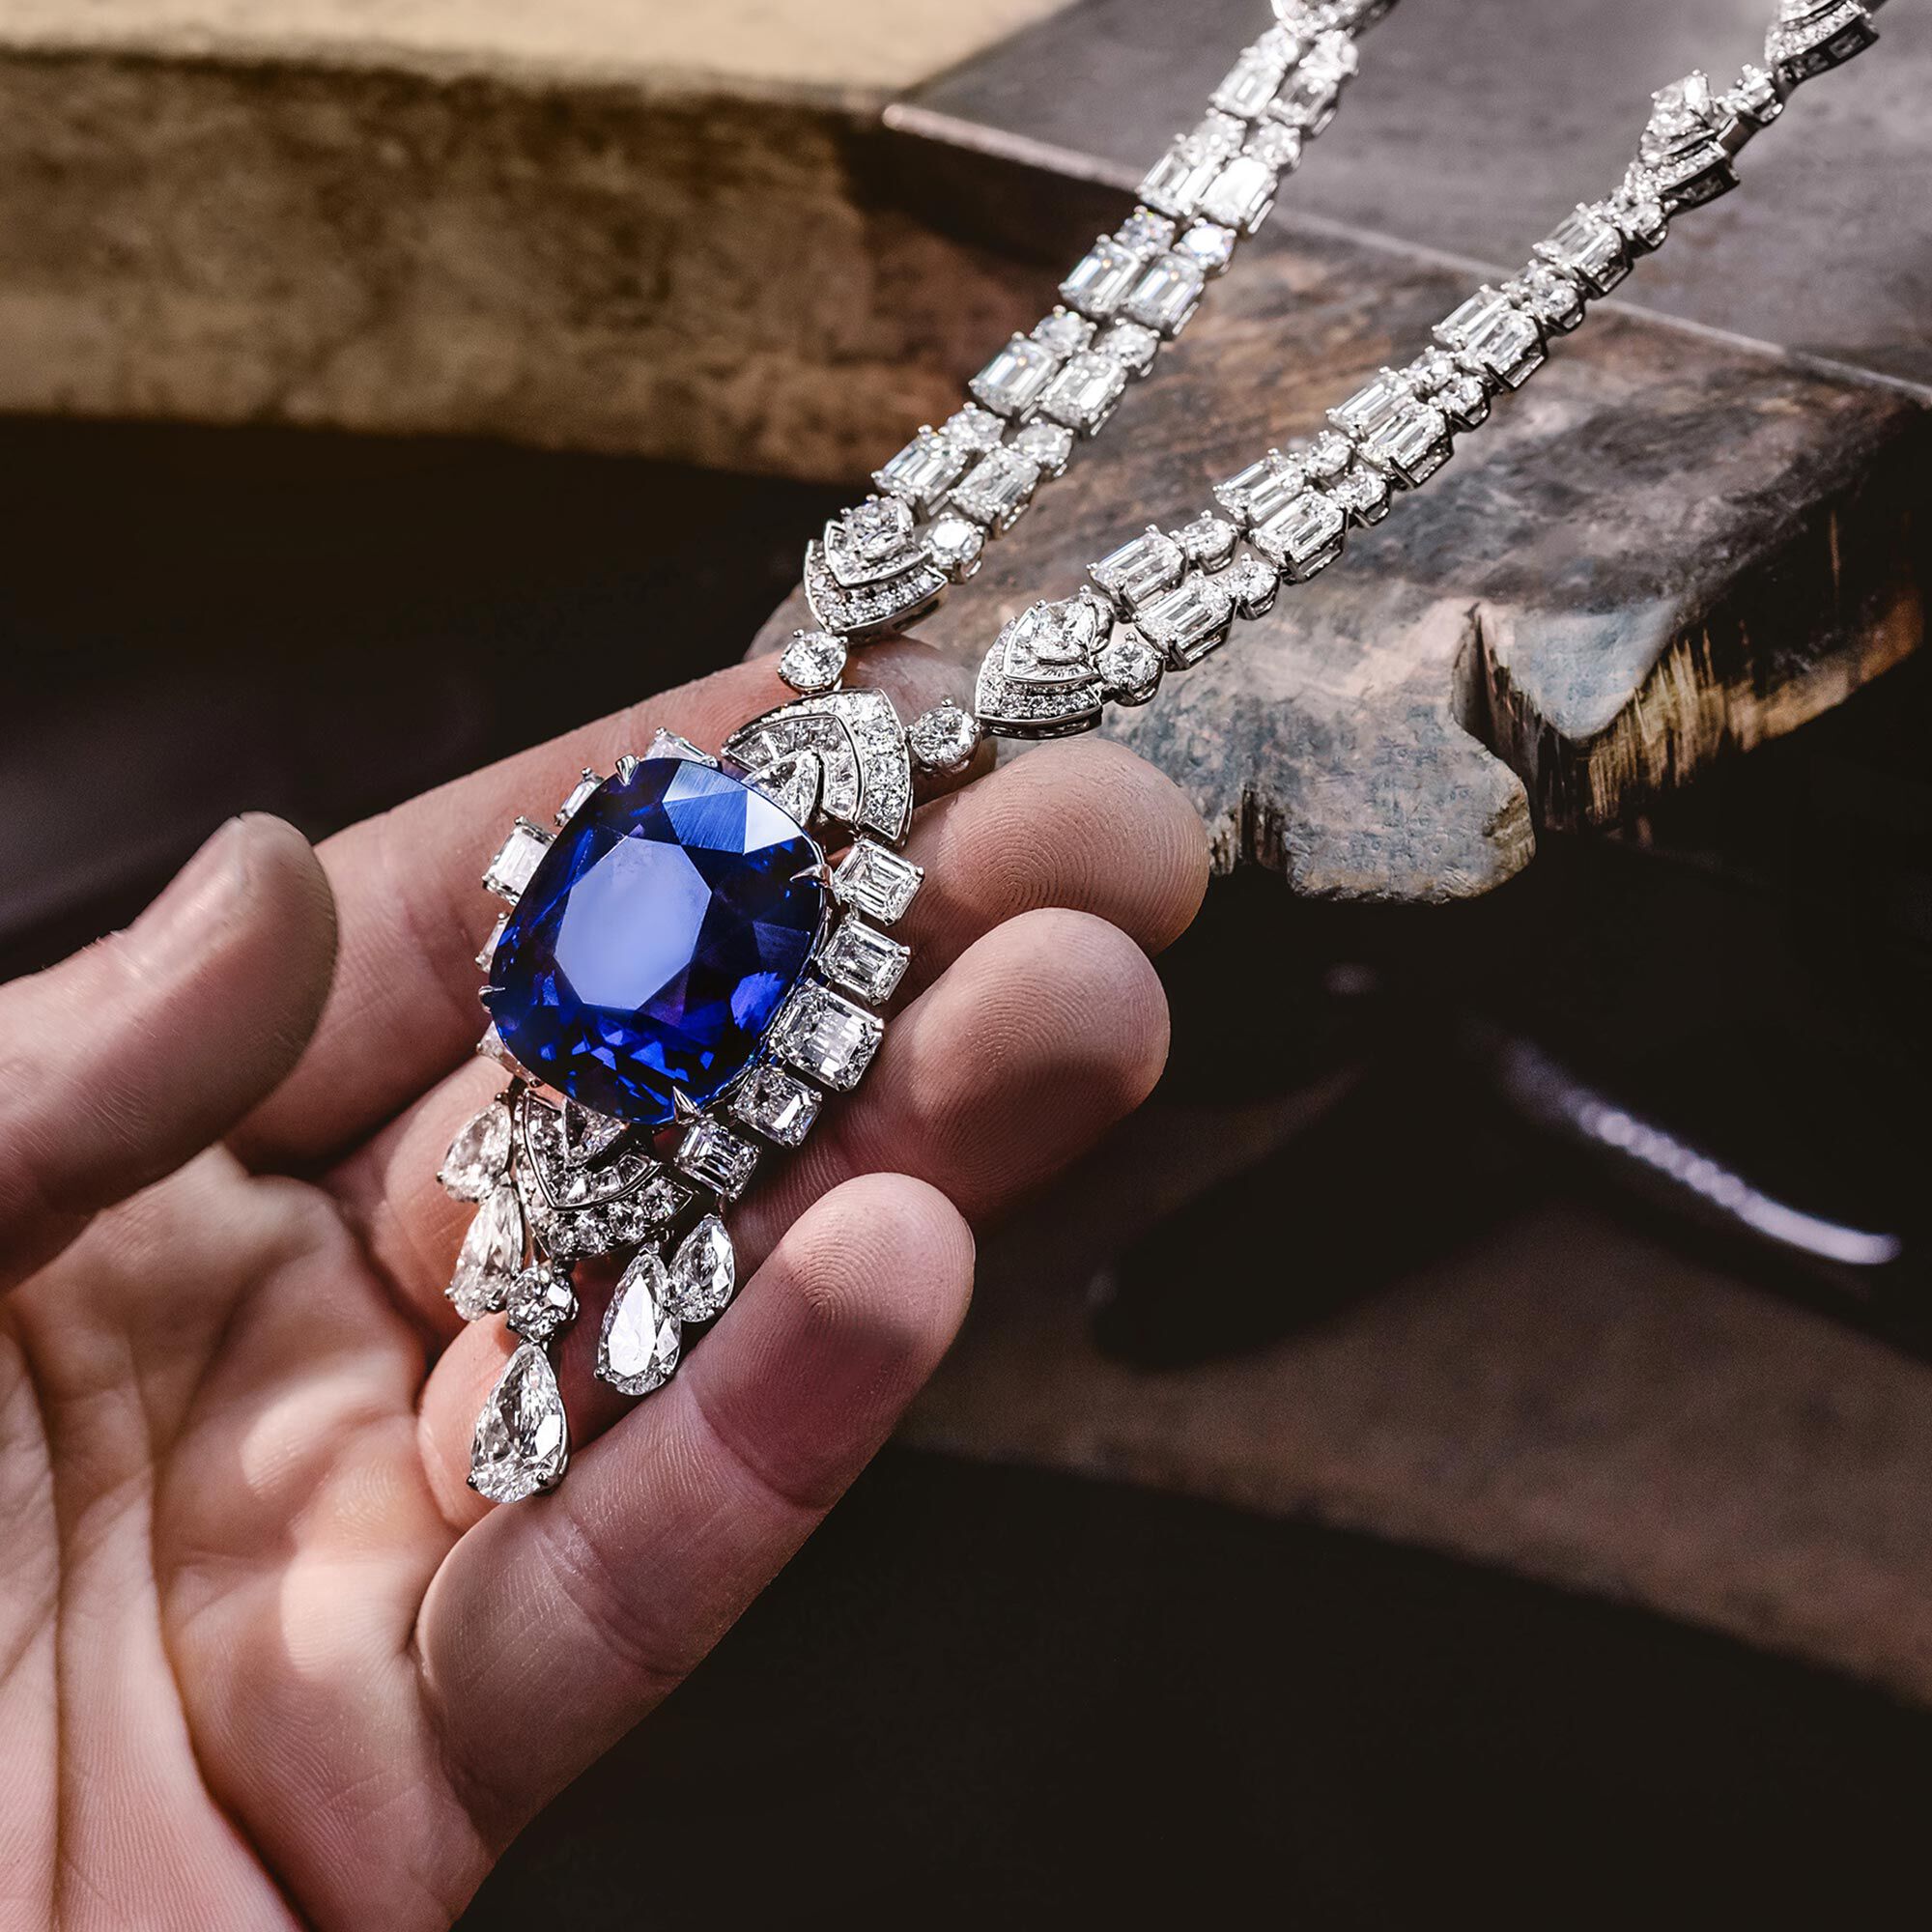 Craftsman creating Graff Sapphire and Diamond High Jewellery Necklace in workshop